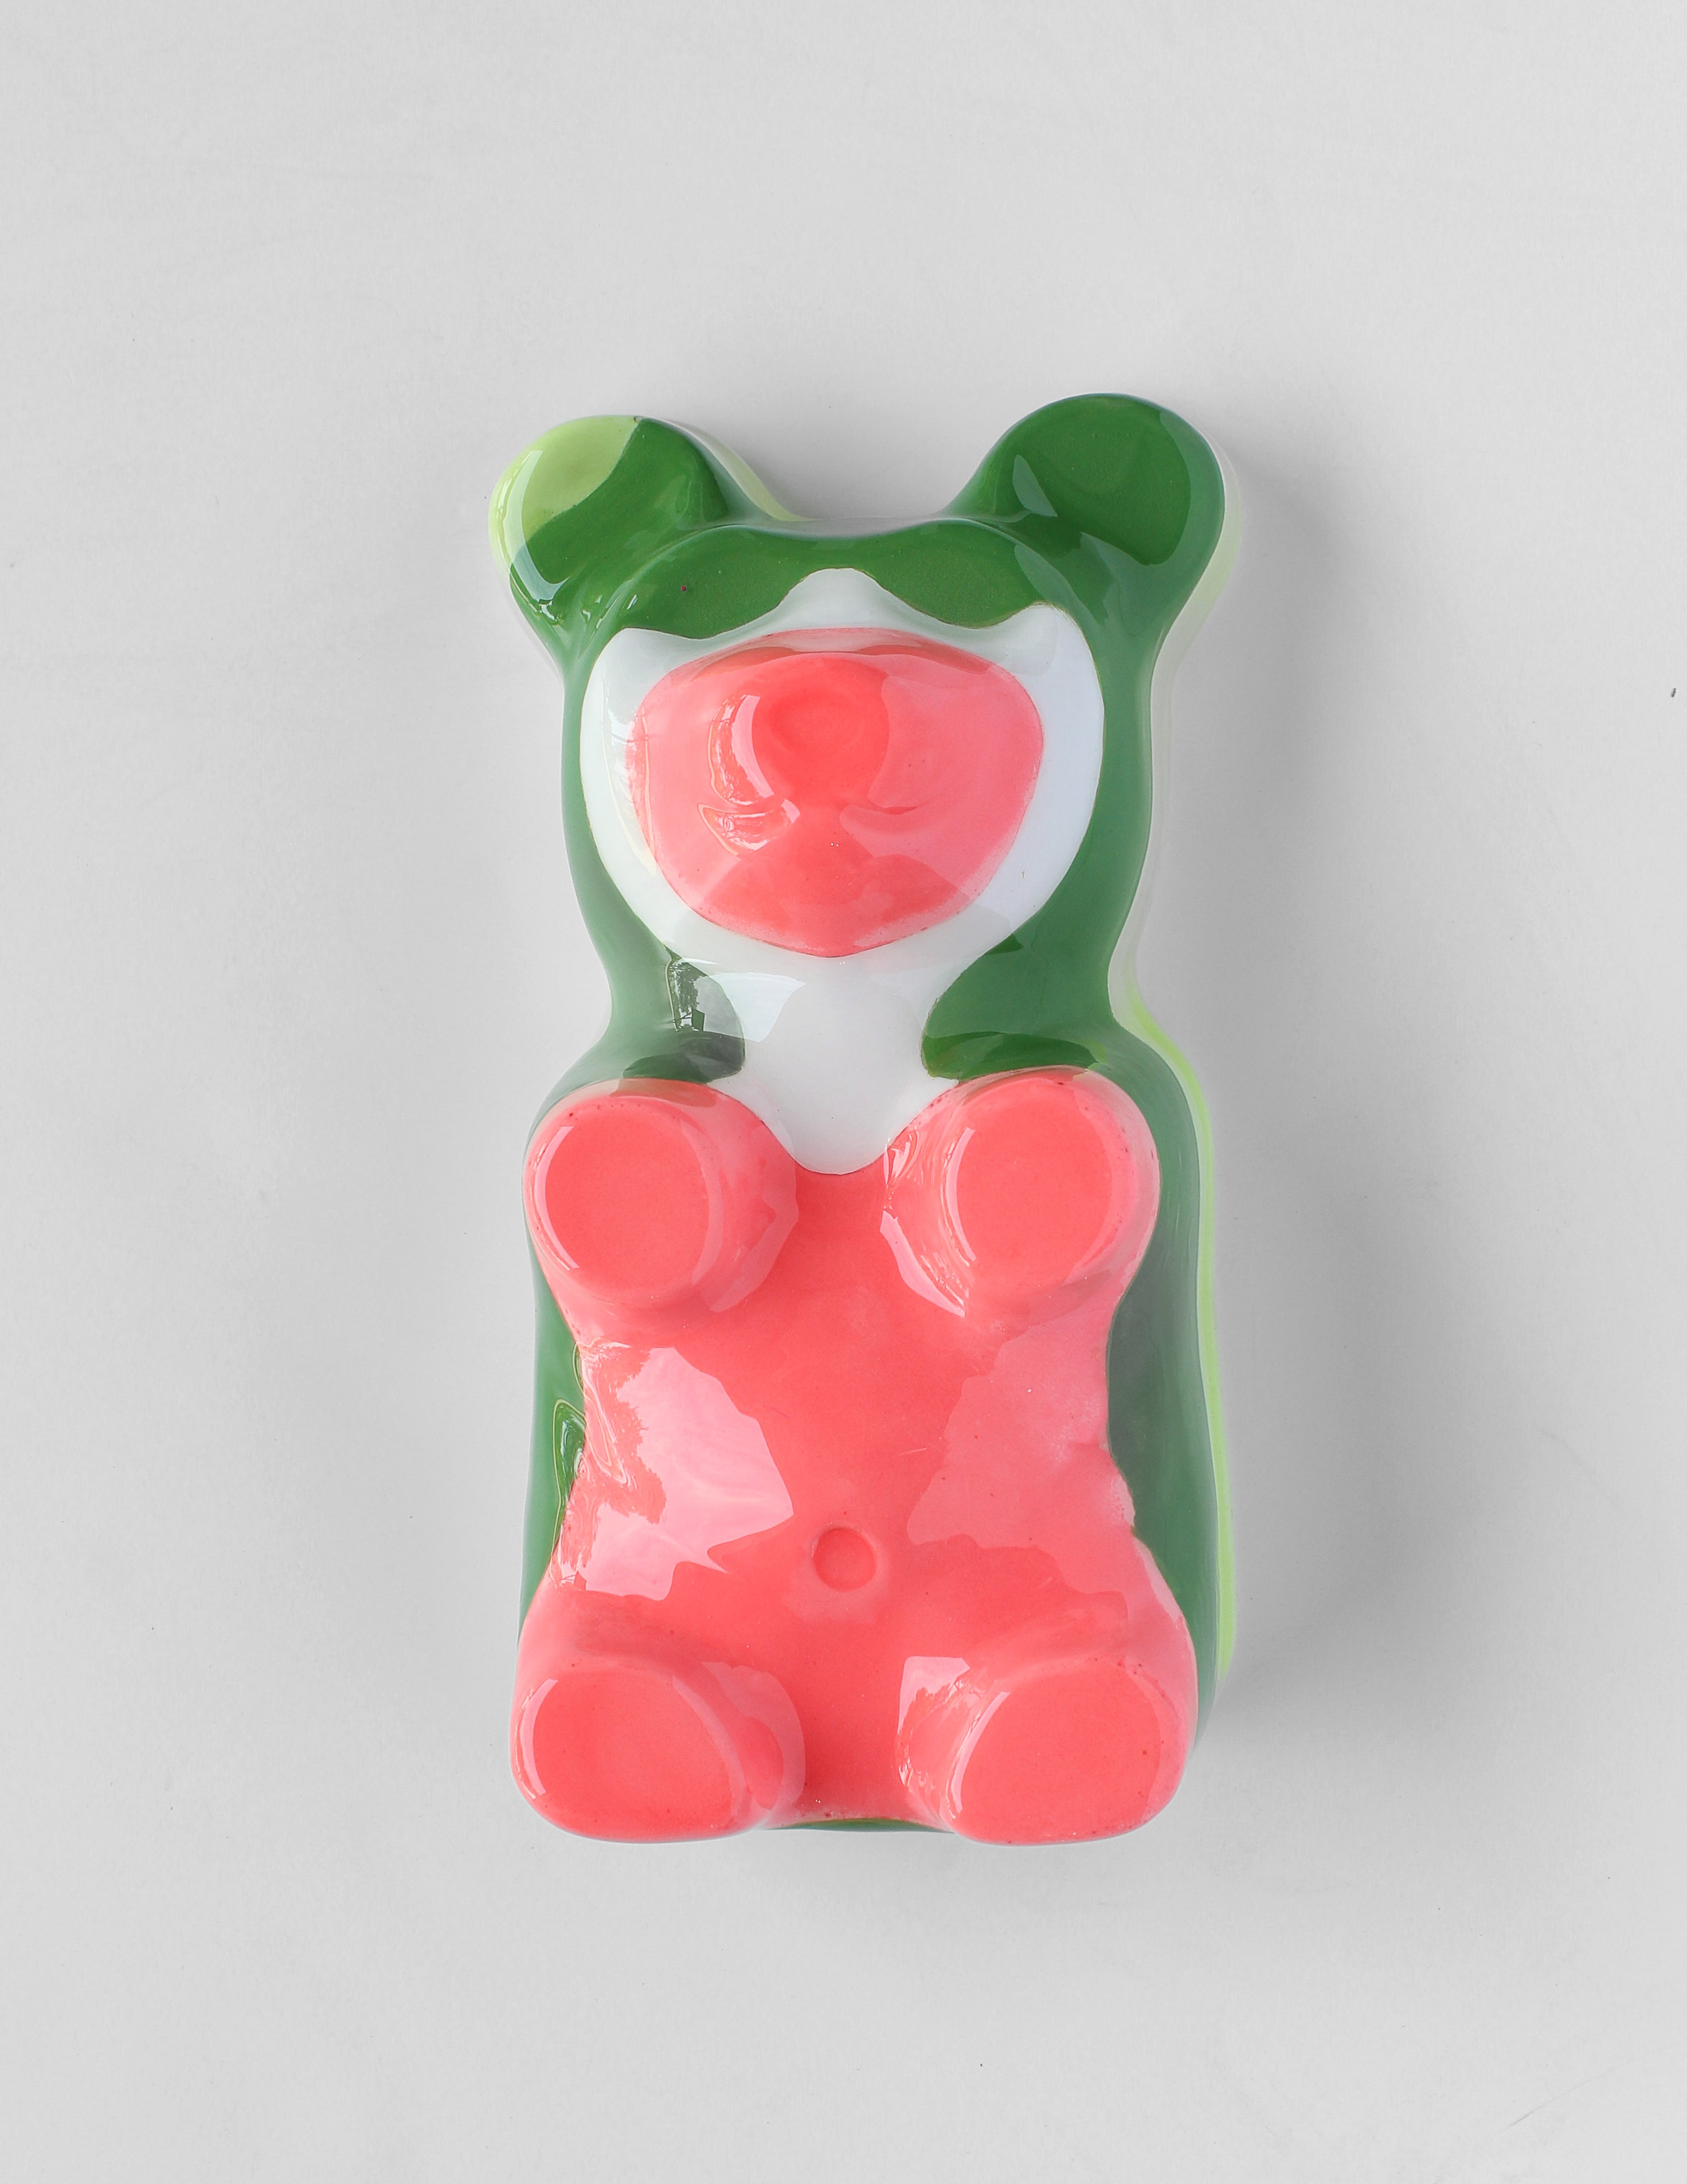 'GUMMY #6' - Pigmented Cement, Resin, Acrylic